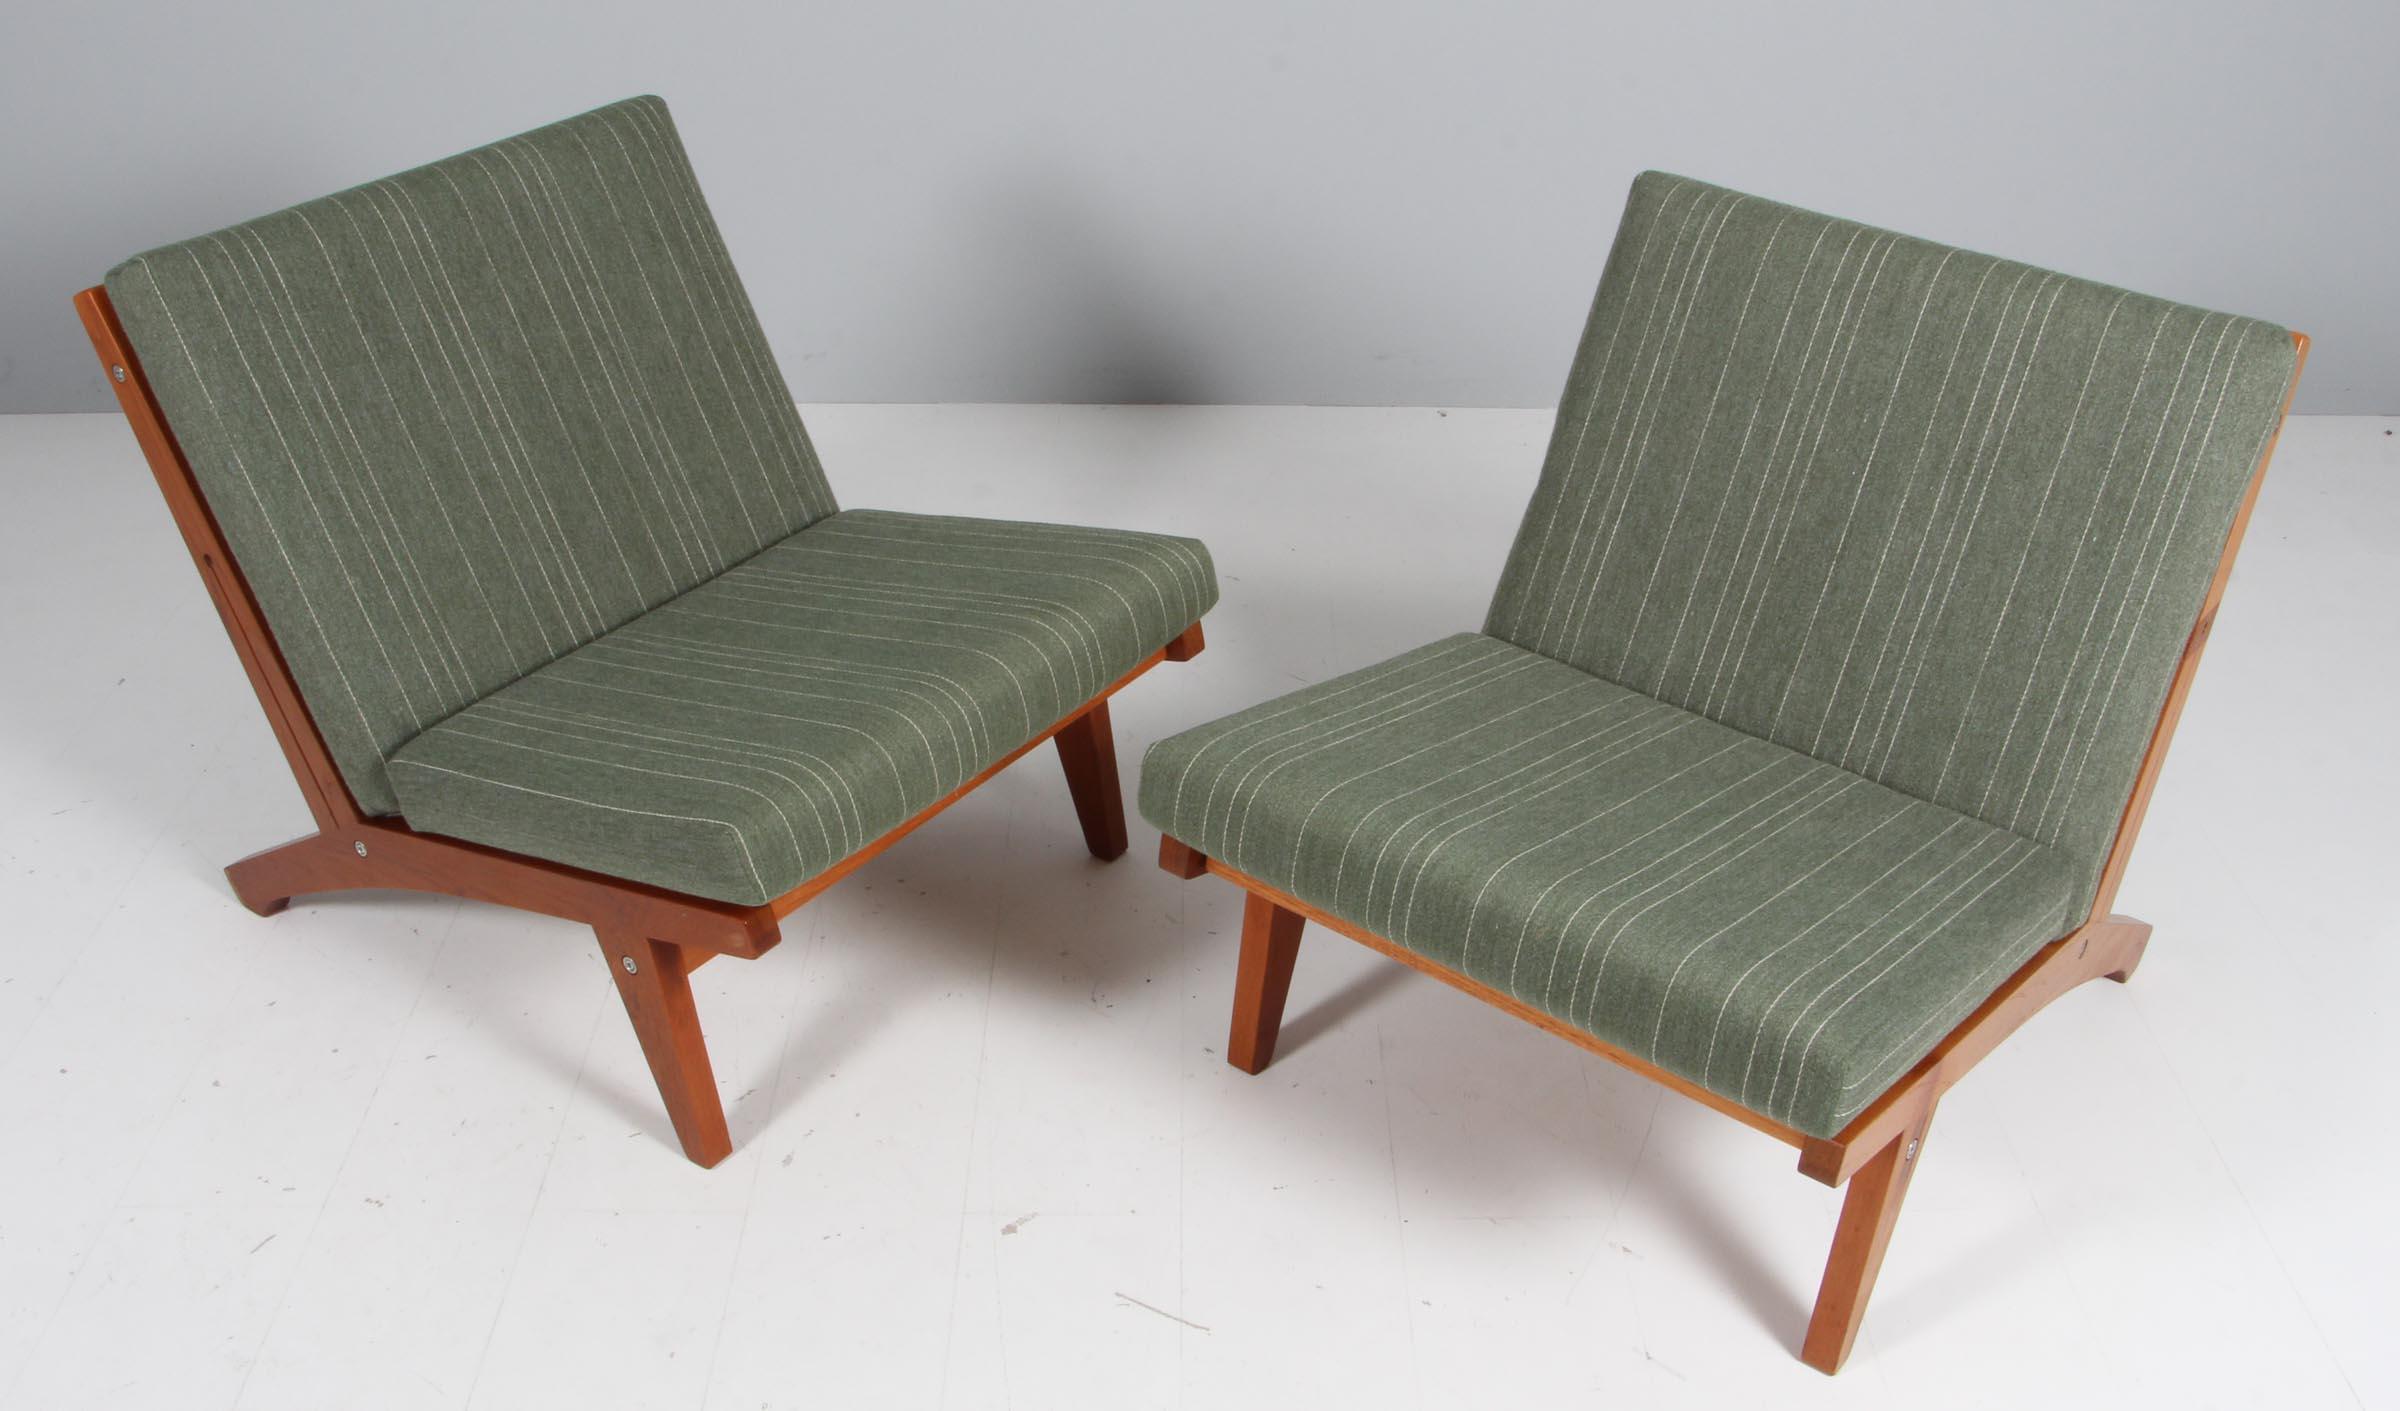 Hans J. Wegner lounge chairs with loose cushions upholstered with Savak wool.

Frame of solid teak.

Model GE-370, made by GETAMA.

ONLY ONE LEFT